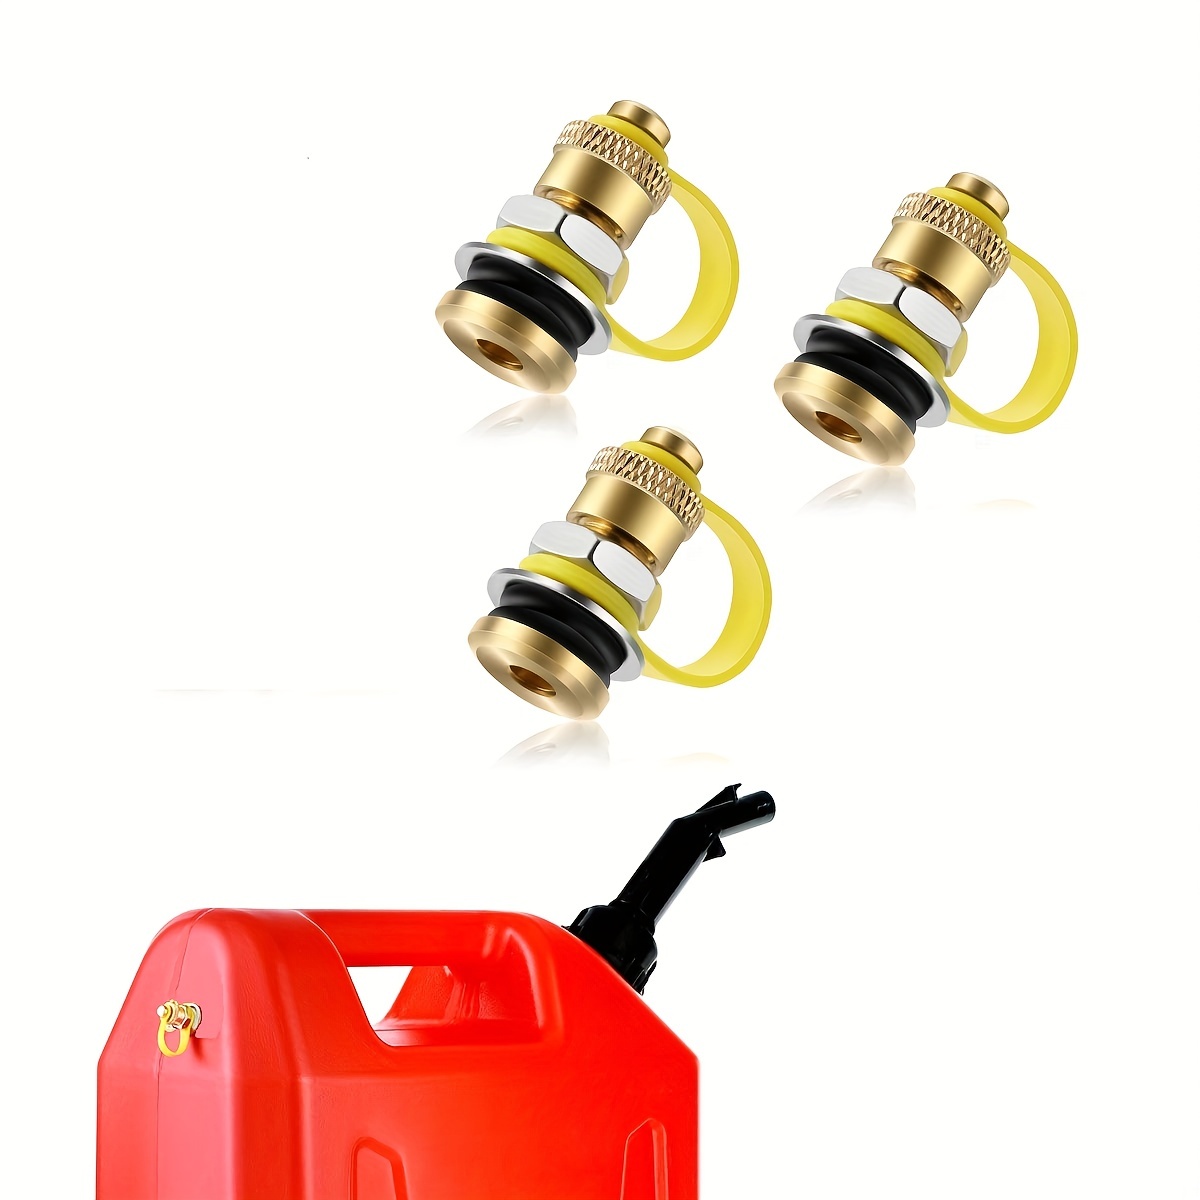 Fuel Gas Can Vent Caps: Faster Flow for Your Gas Jug!